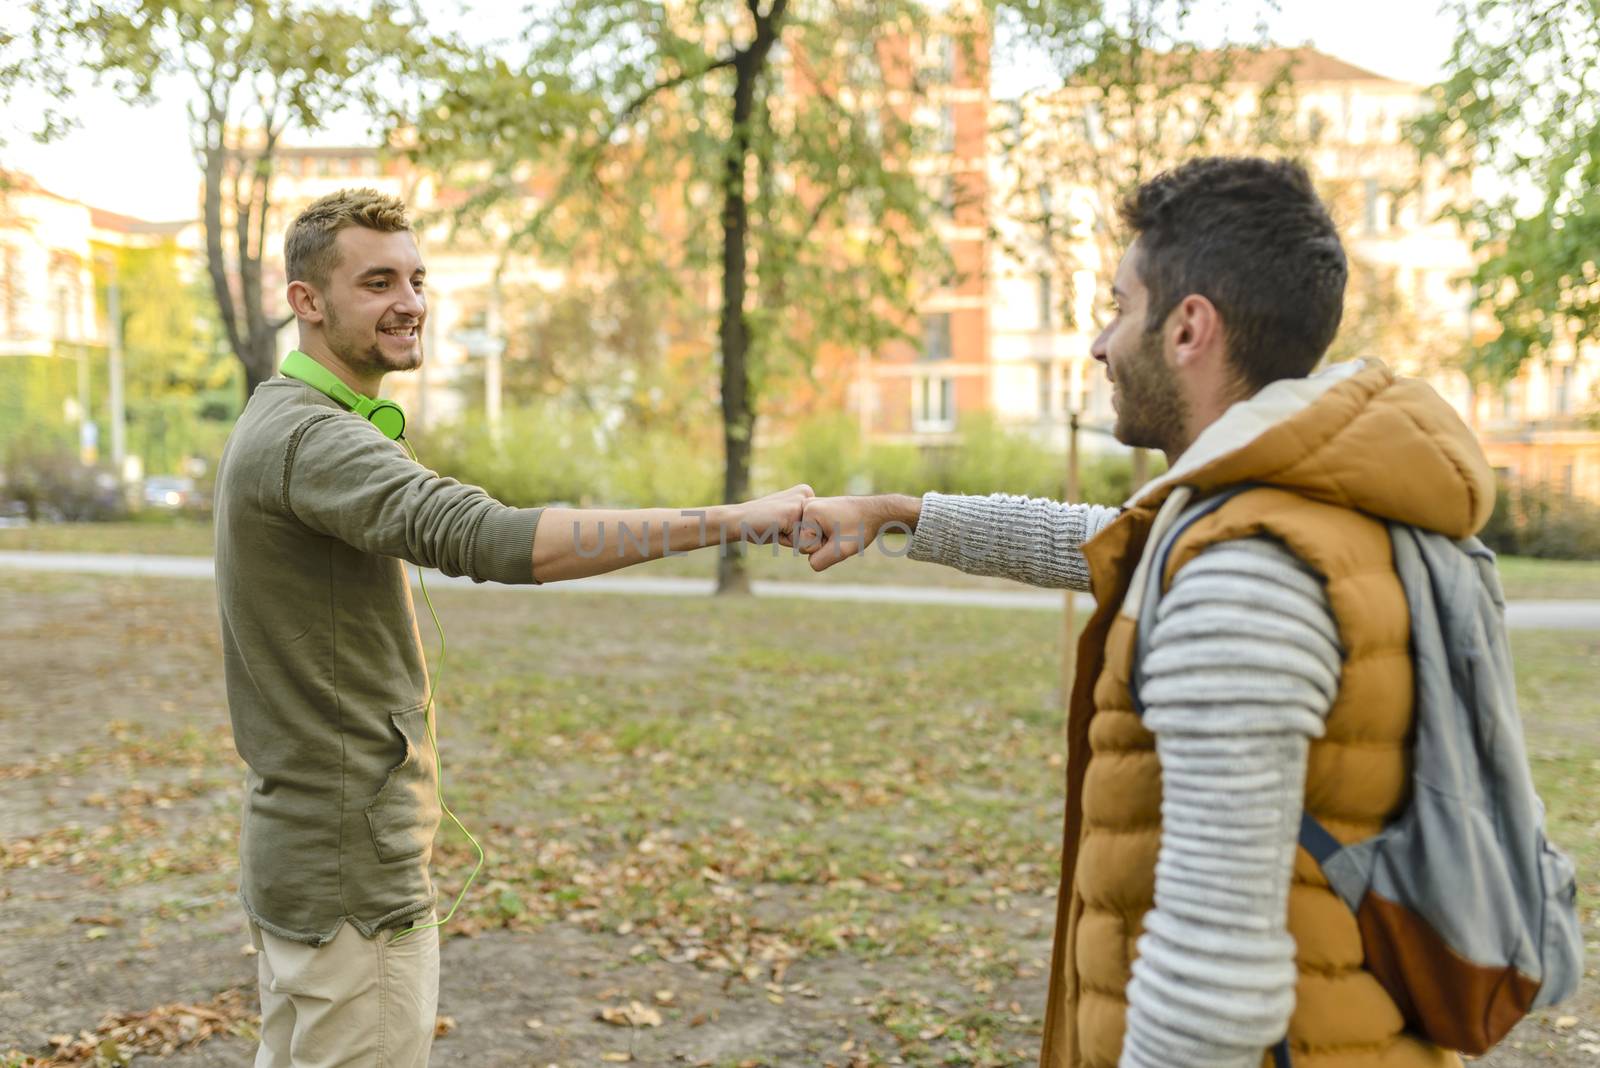 Two young man in the public park sending a greets to each other